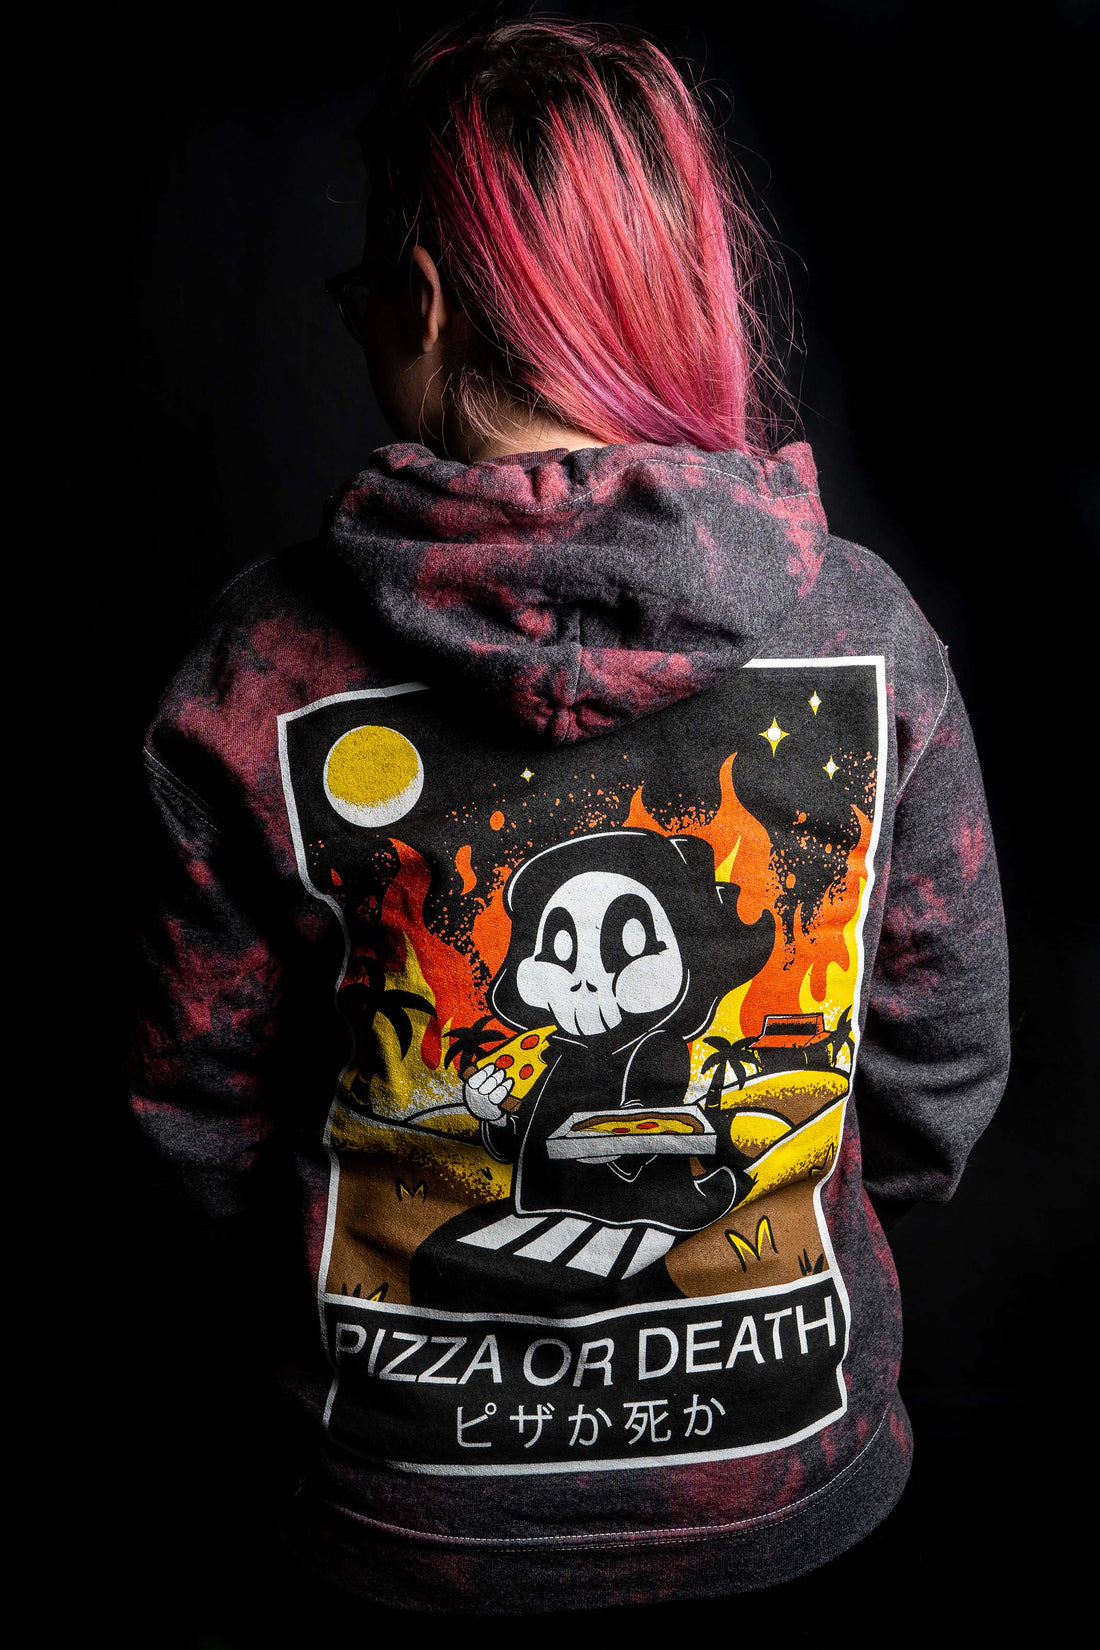 "Pizza or Death" Red Crystal Dyed Unisex Hooded Sweatshirt (Limited Edition)